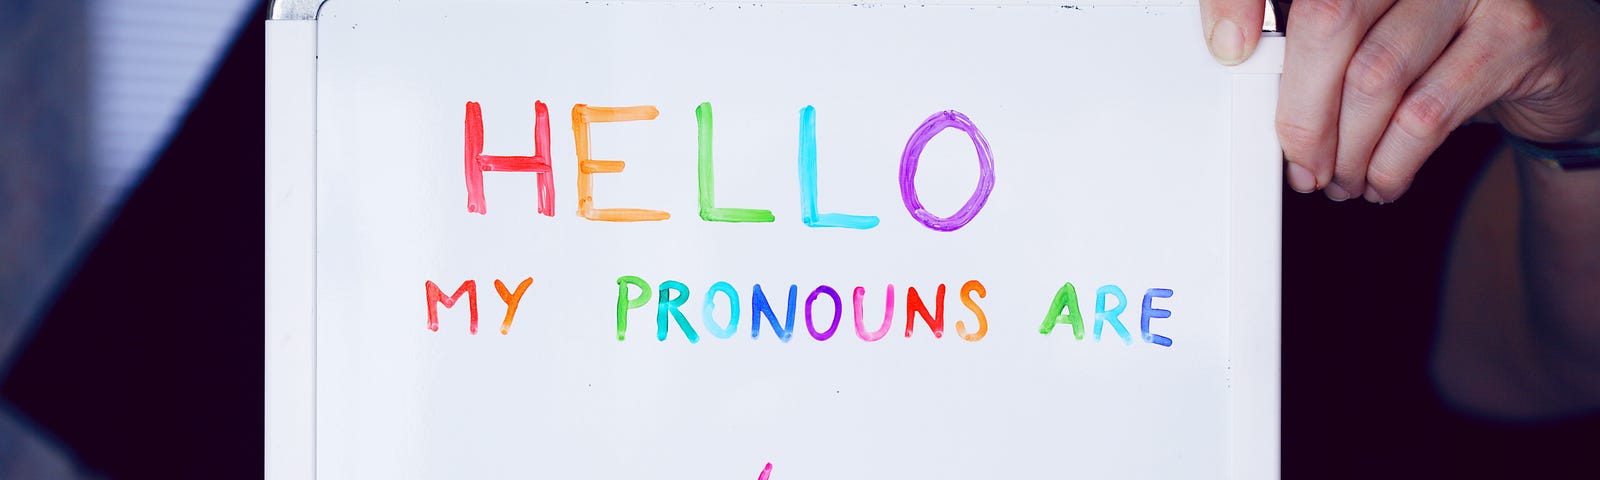 photo of label that says “hello, my pronouns are” in rainbow colors.